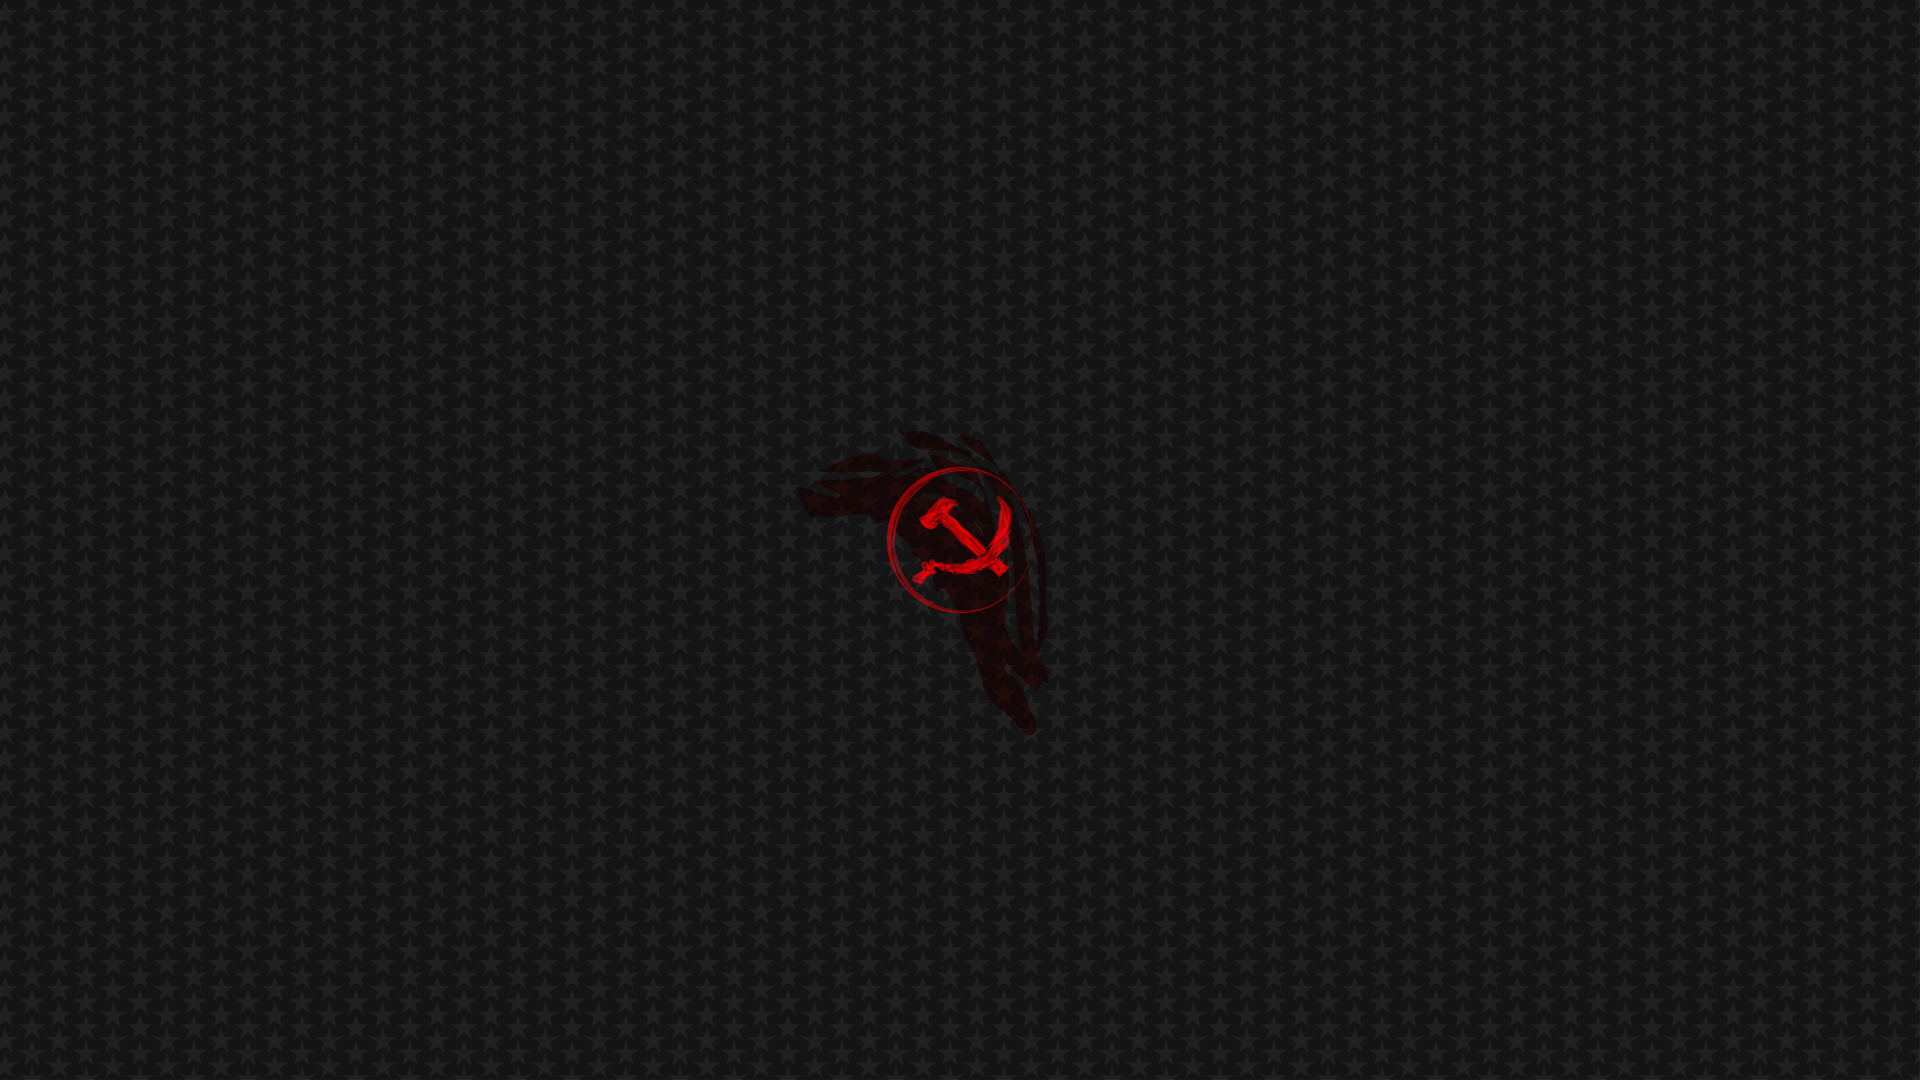 Red hammer and sickle on a gray background with stars